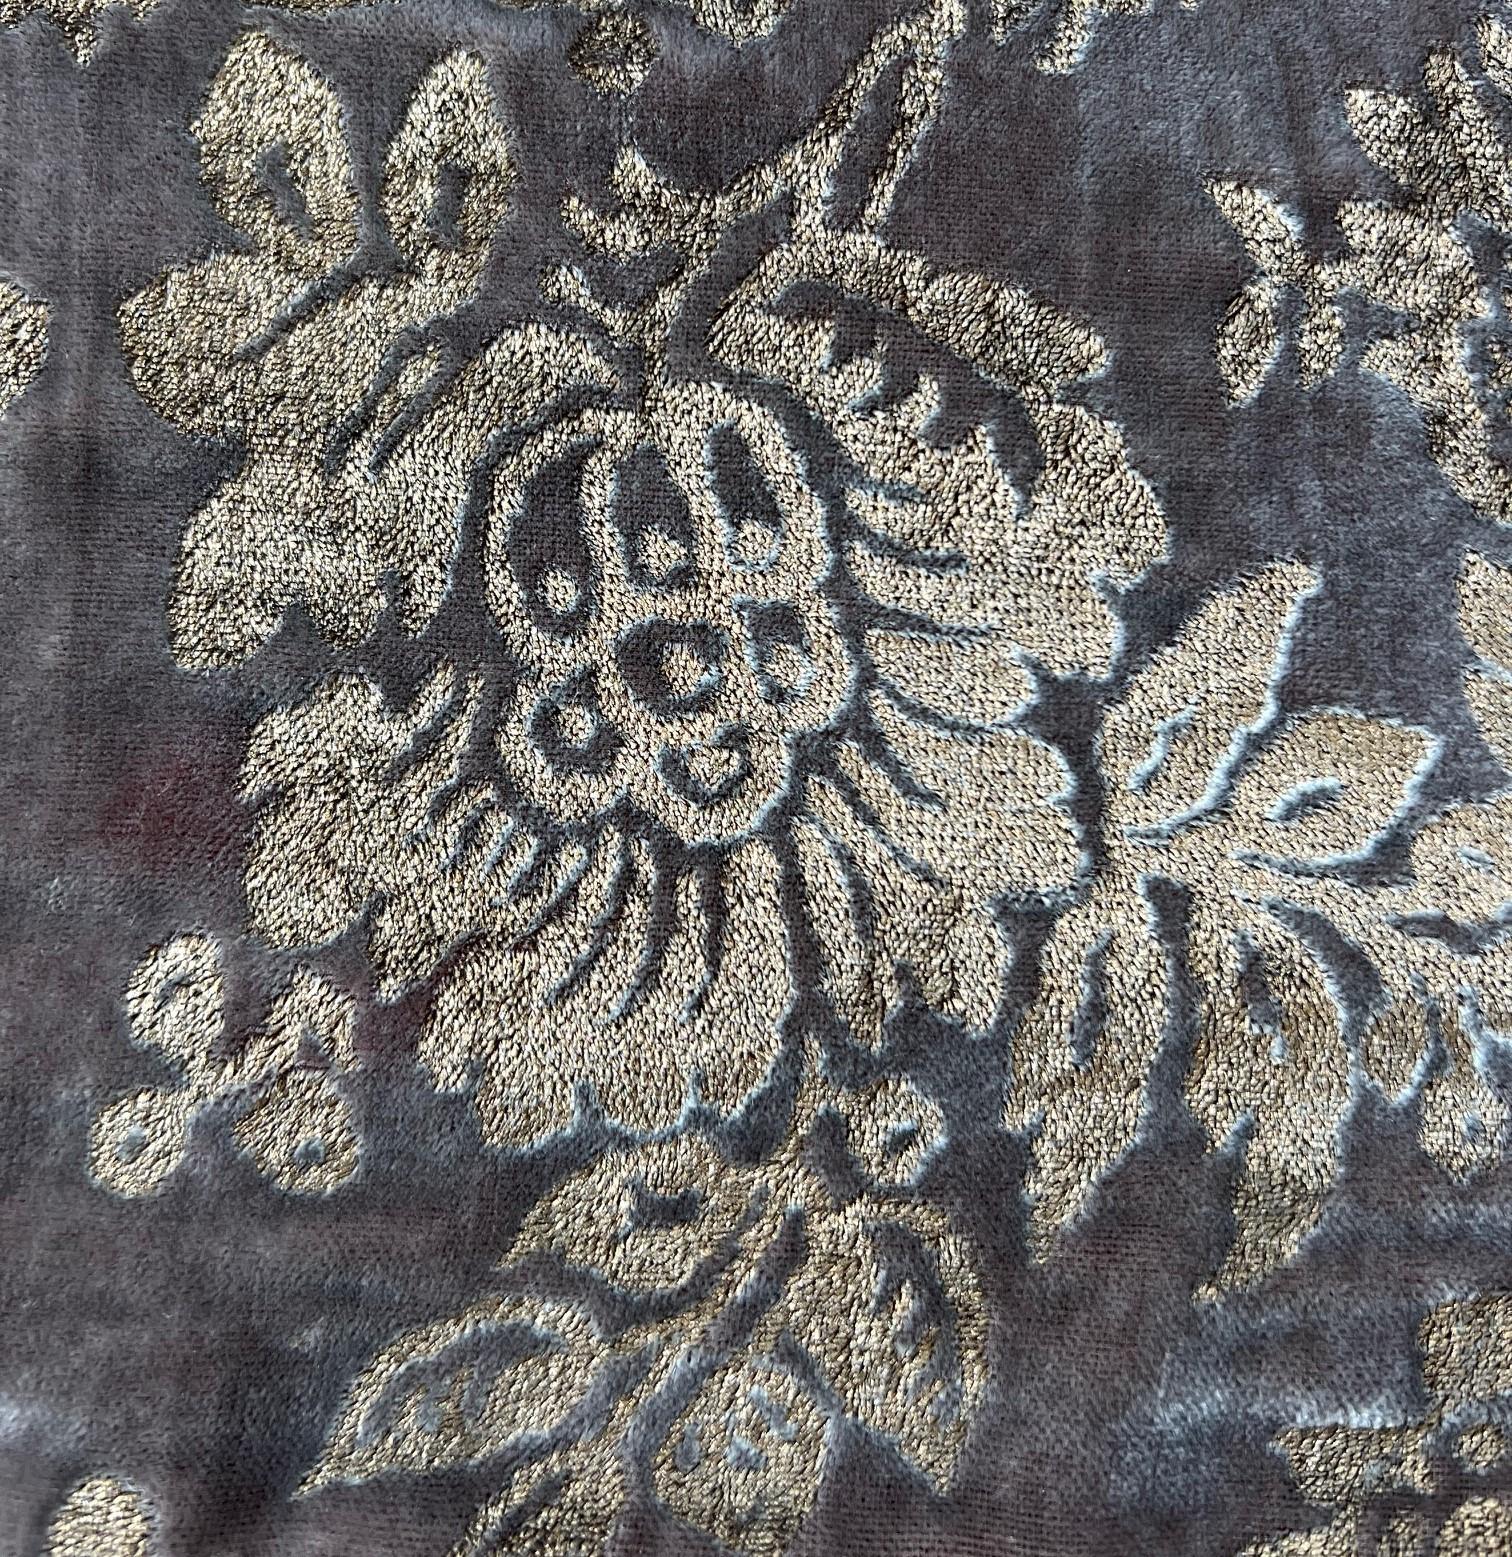 Rare Fortuny Silk Velvet in Warm French Brown, Stenciled with Pigmented Gold For Sale 1